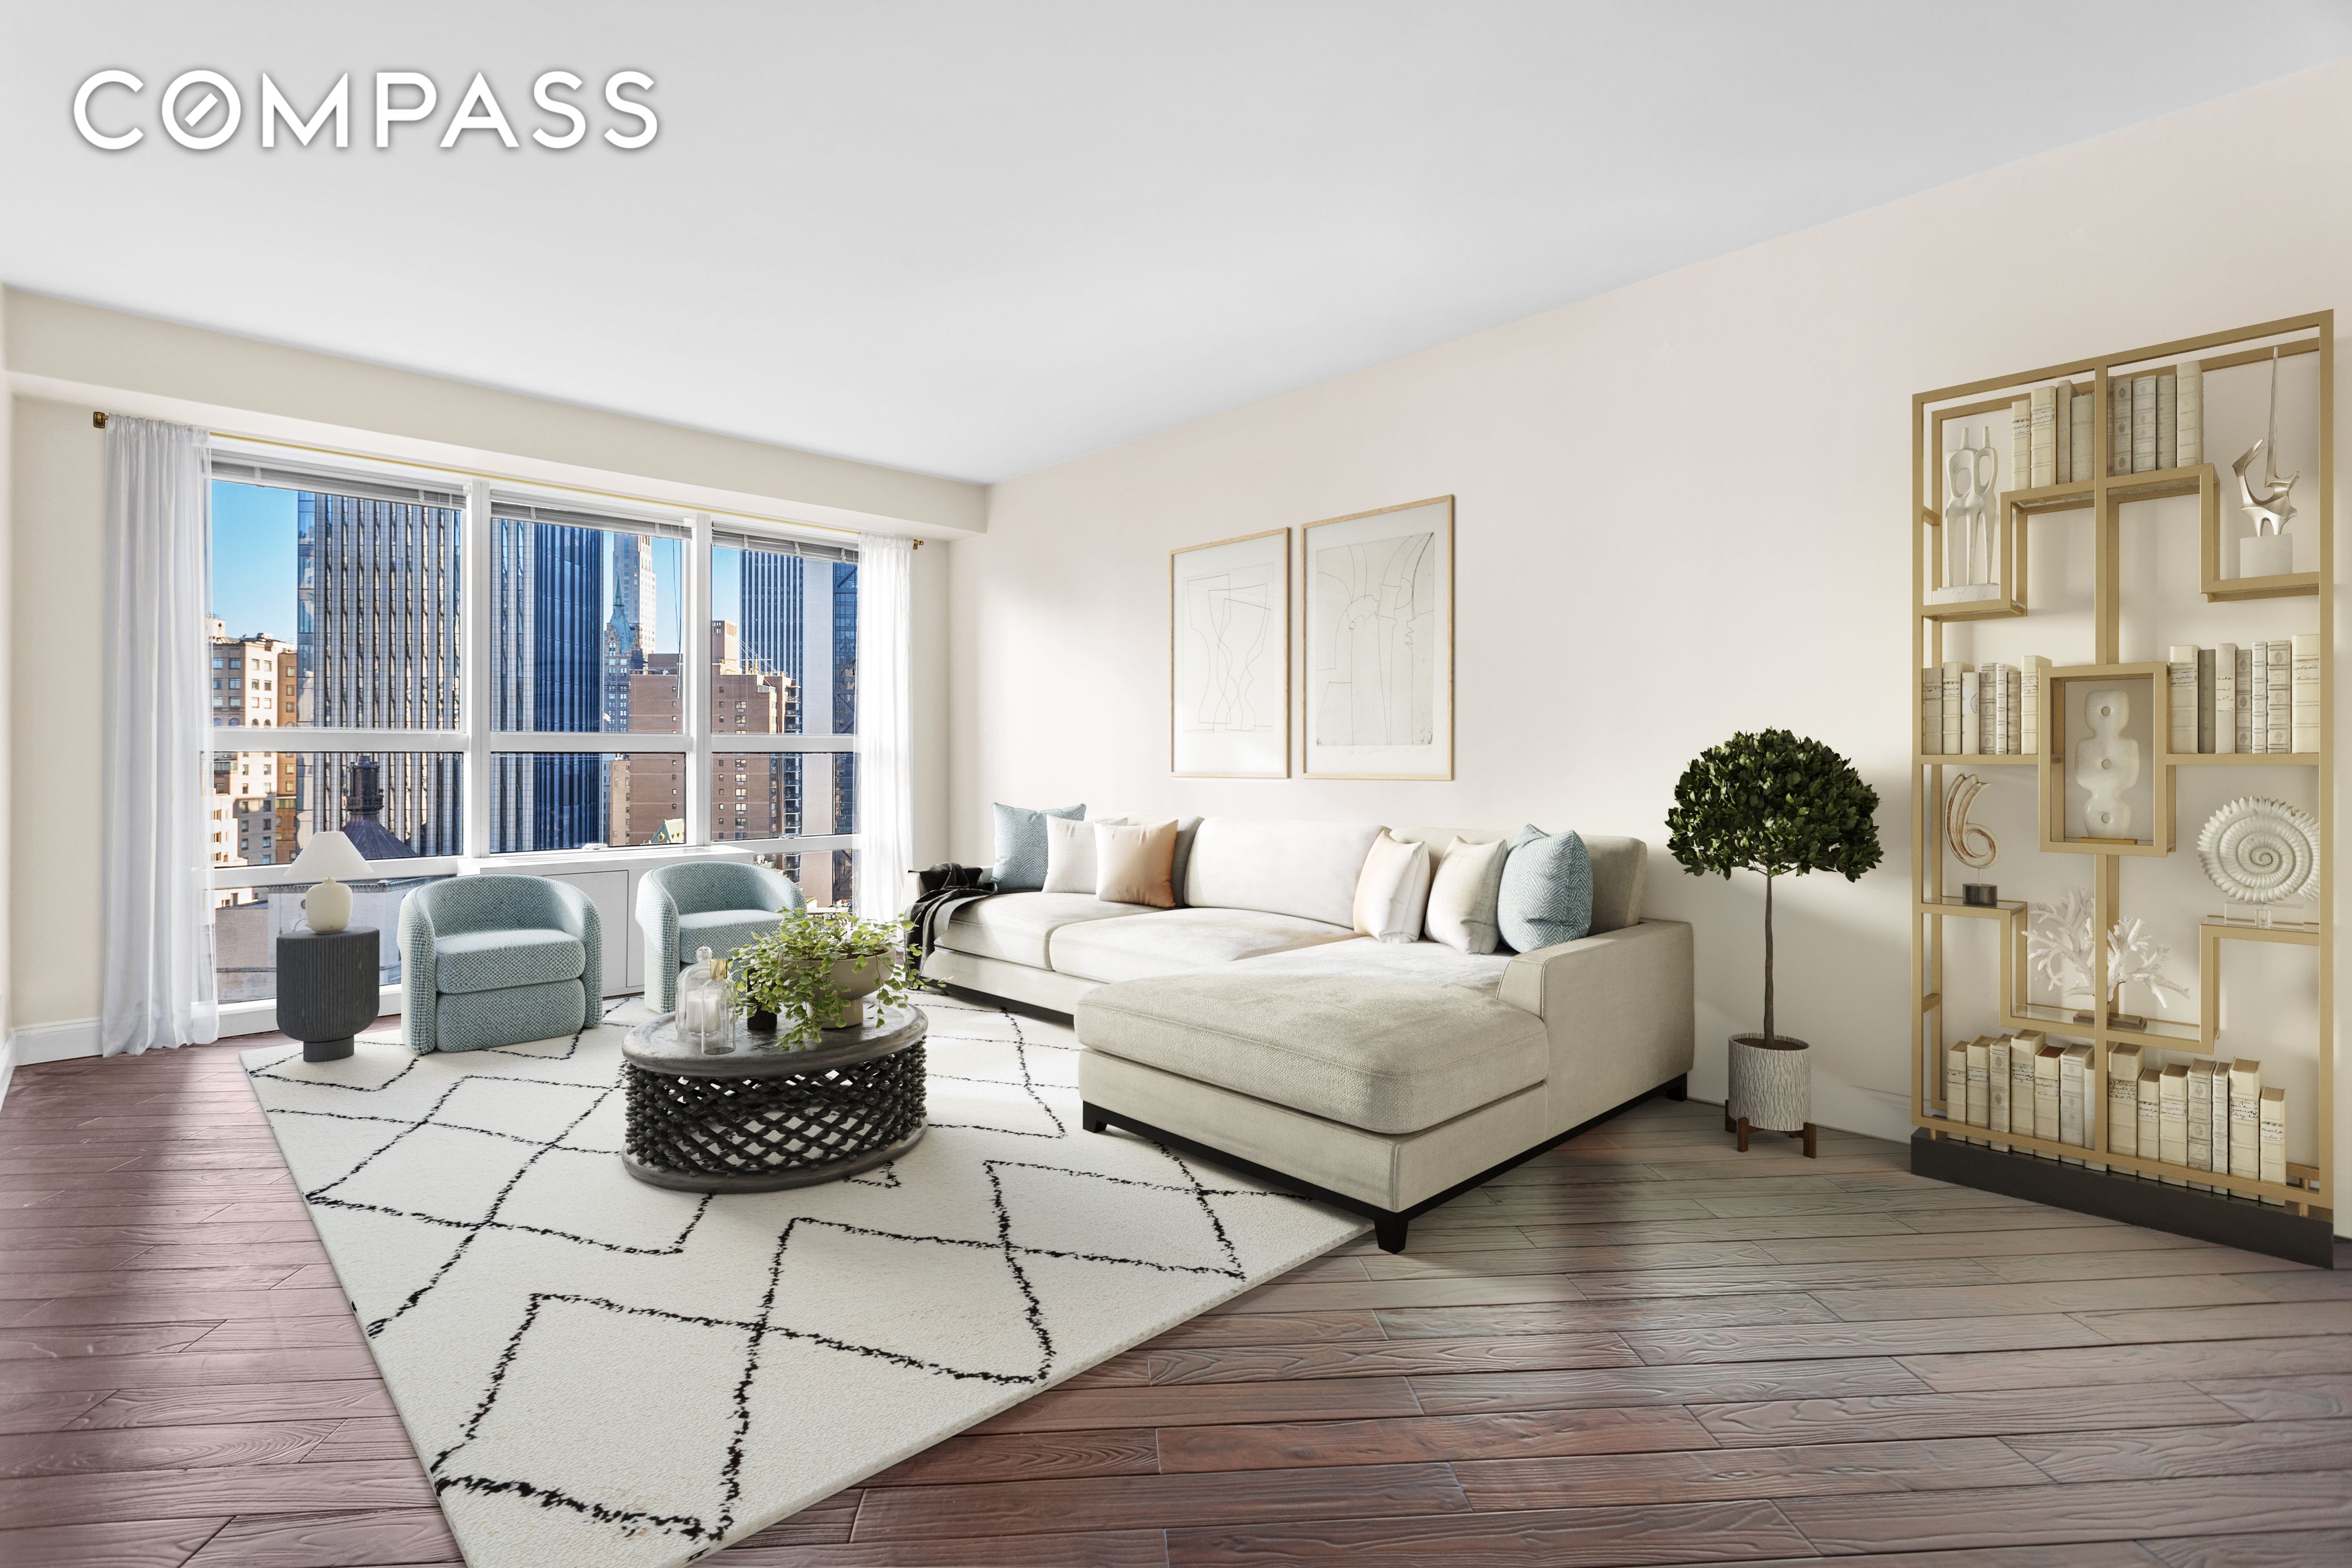 146 West 57th Street 34A, Theater District, Midtown West, NYC - 2 Bedrooms  
2.5 Bathrooms  
5 Rooms - 